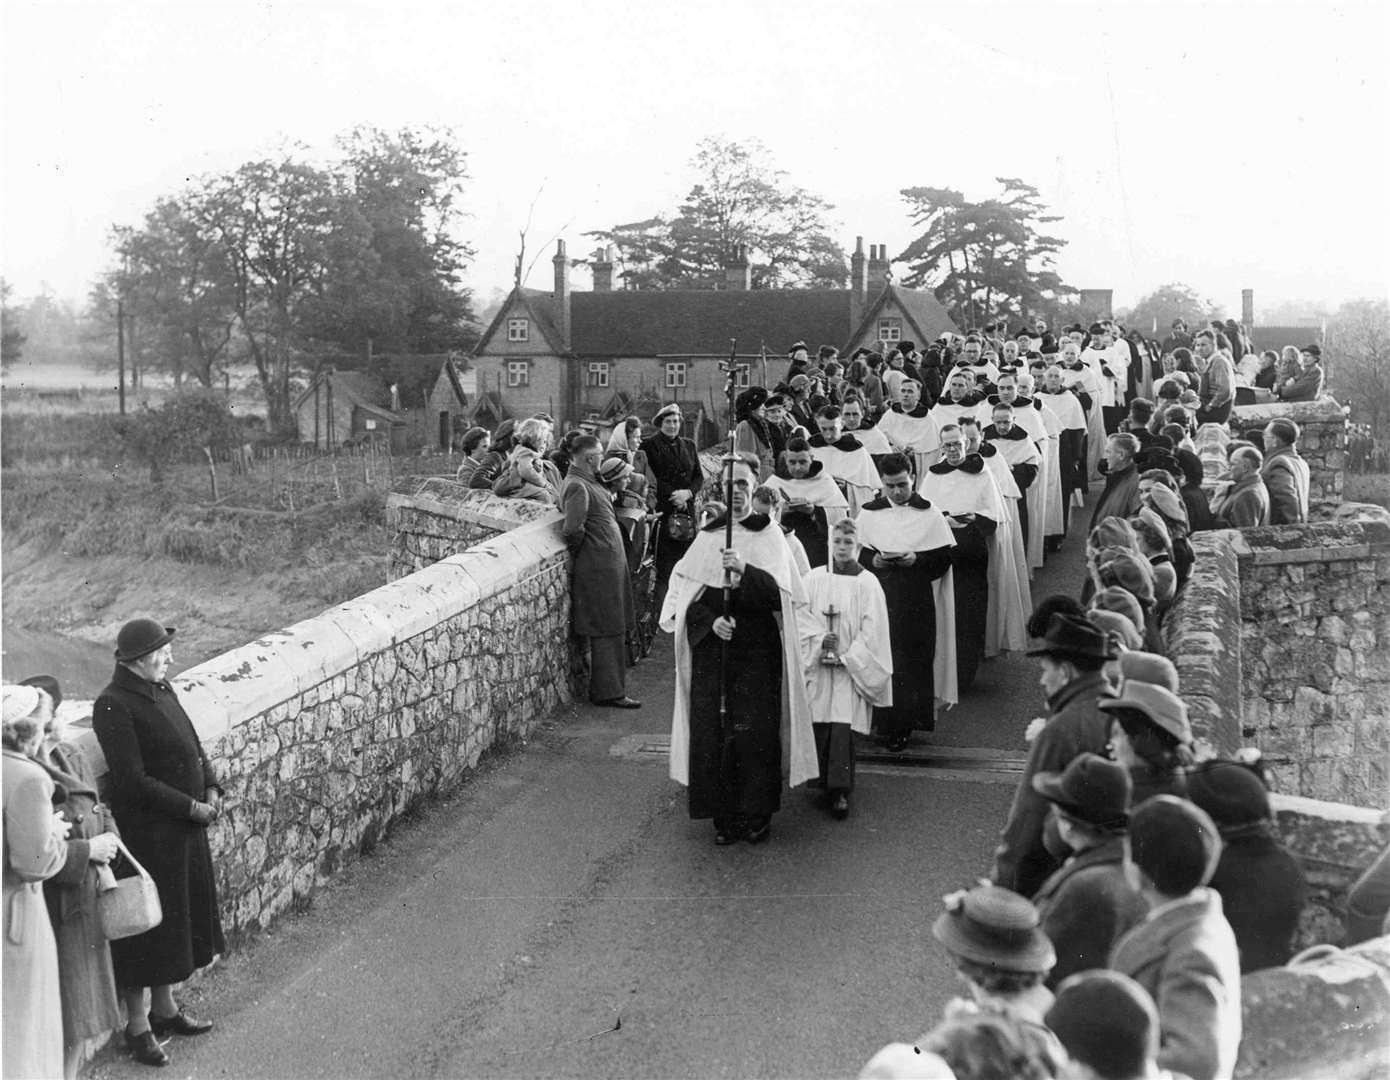 Carmelite Friars in procession at Aylesford in the early 1950s